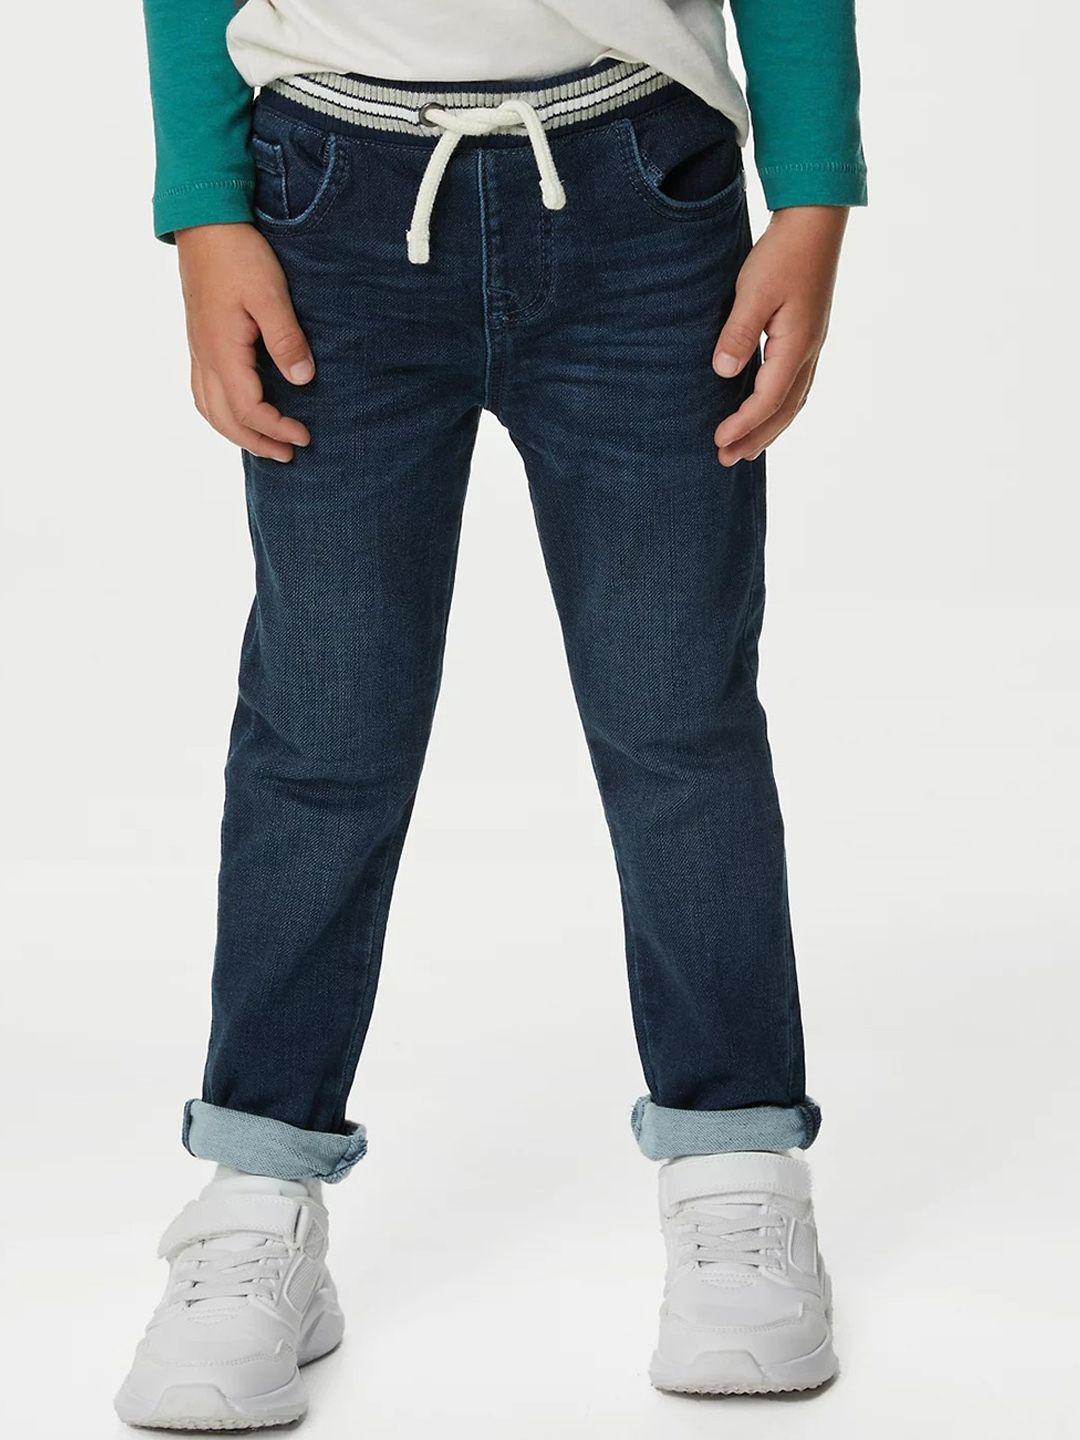 Marks & Spencer Boys Mid-Rise Clean Look Light Fade Stretchable Jeans